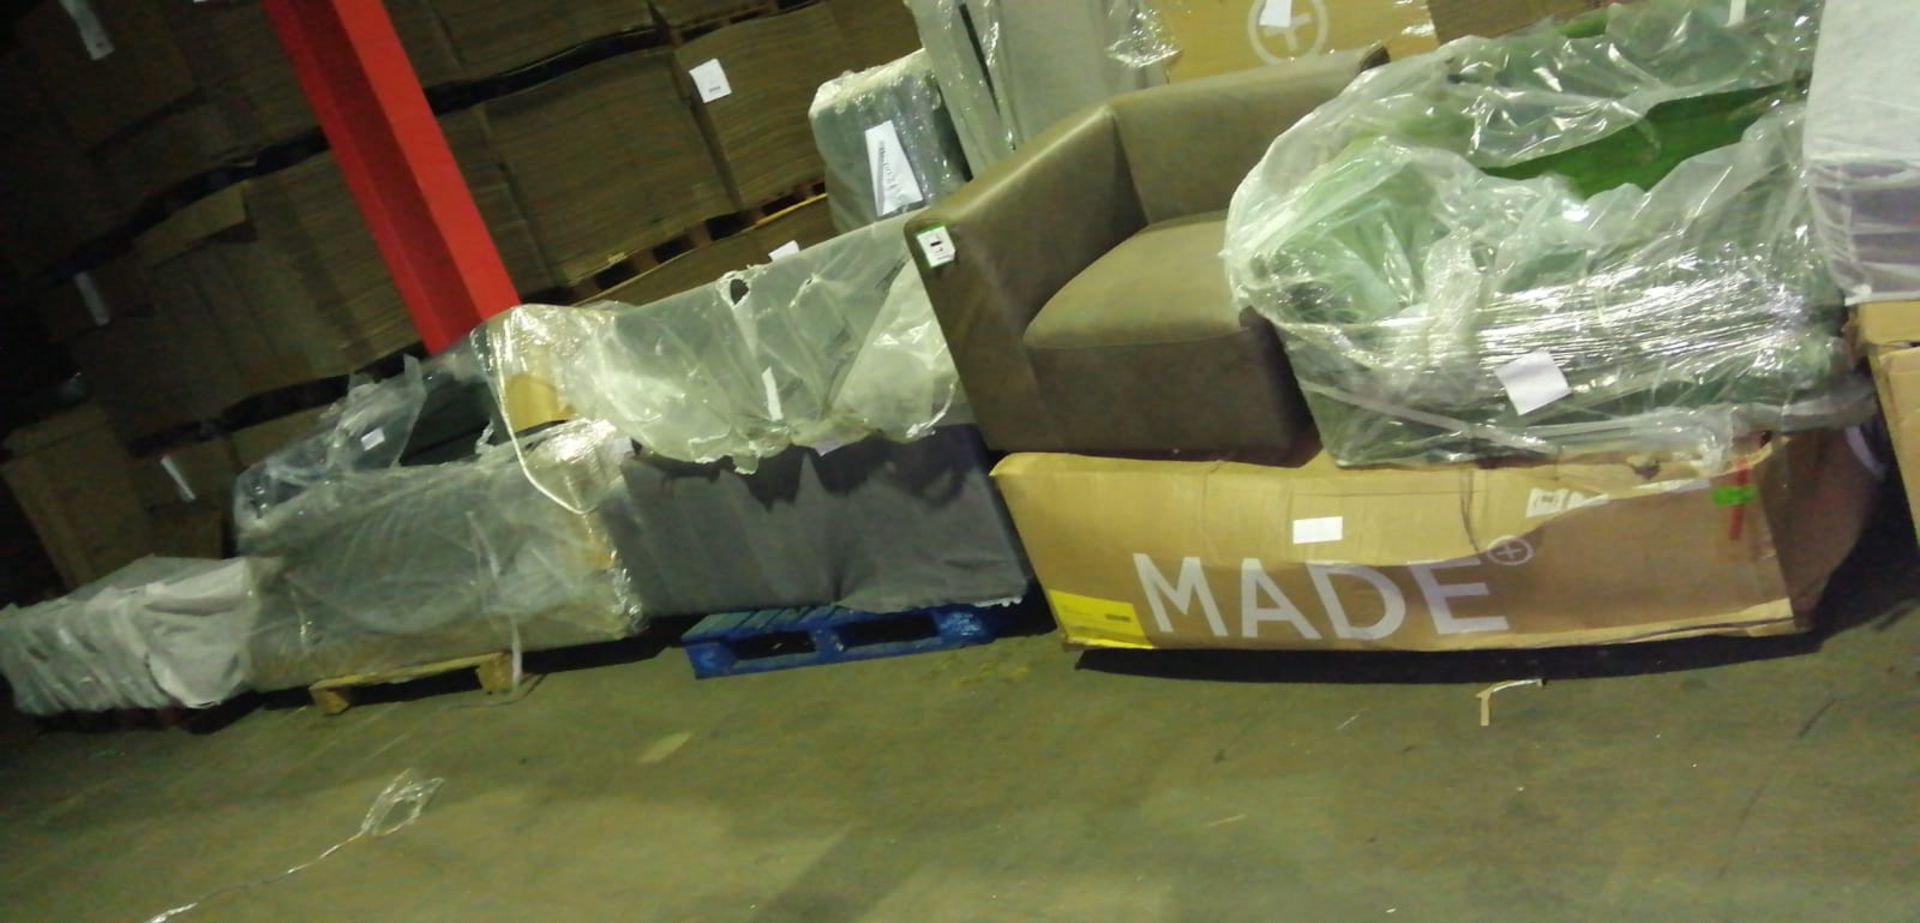 Approx 1-2 wagons of Customer returns Made.com Sofas and Sofa parts as manifested in the pictures, - Image 6 of 10